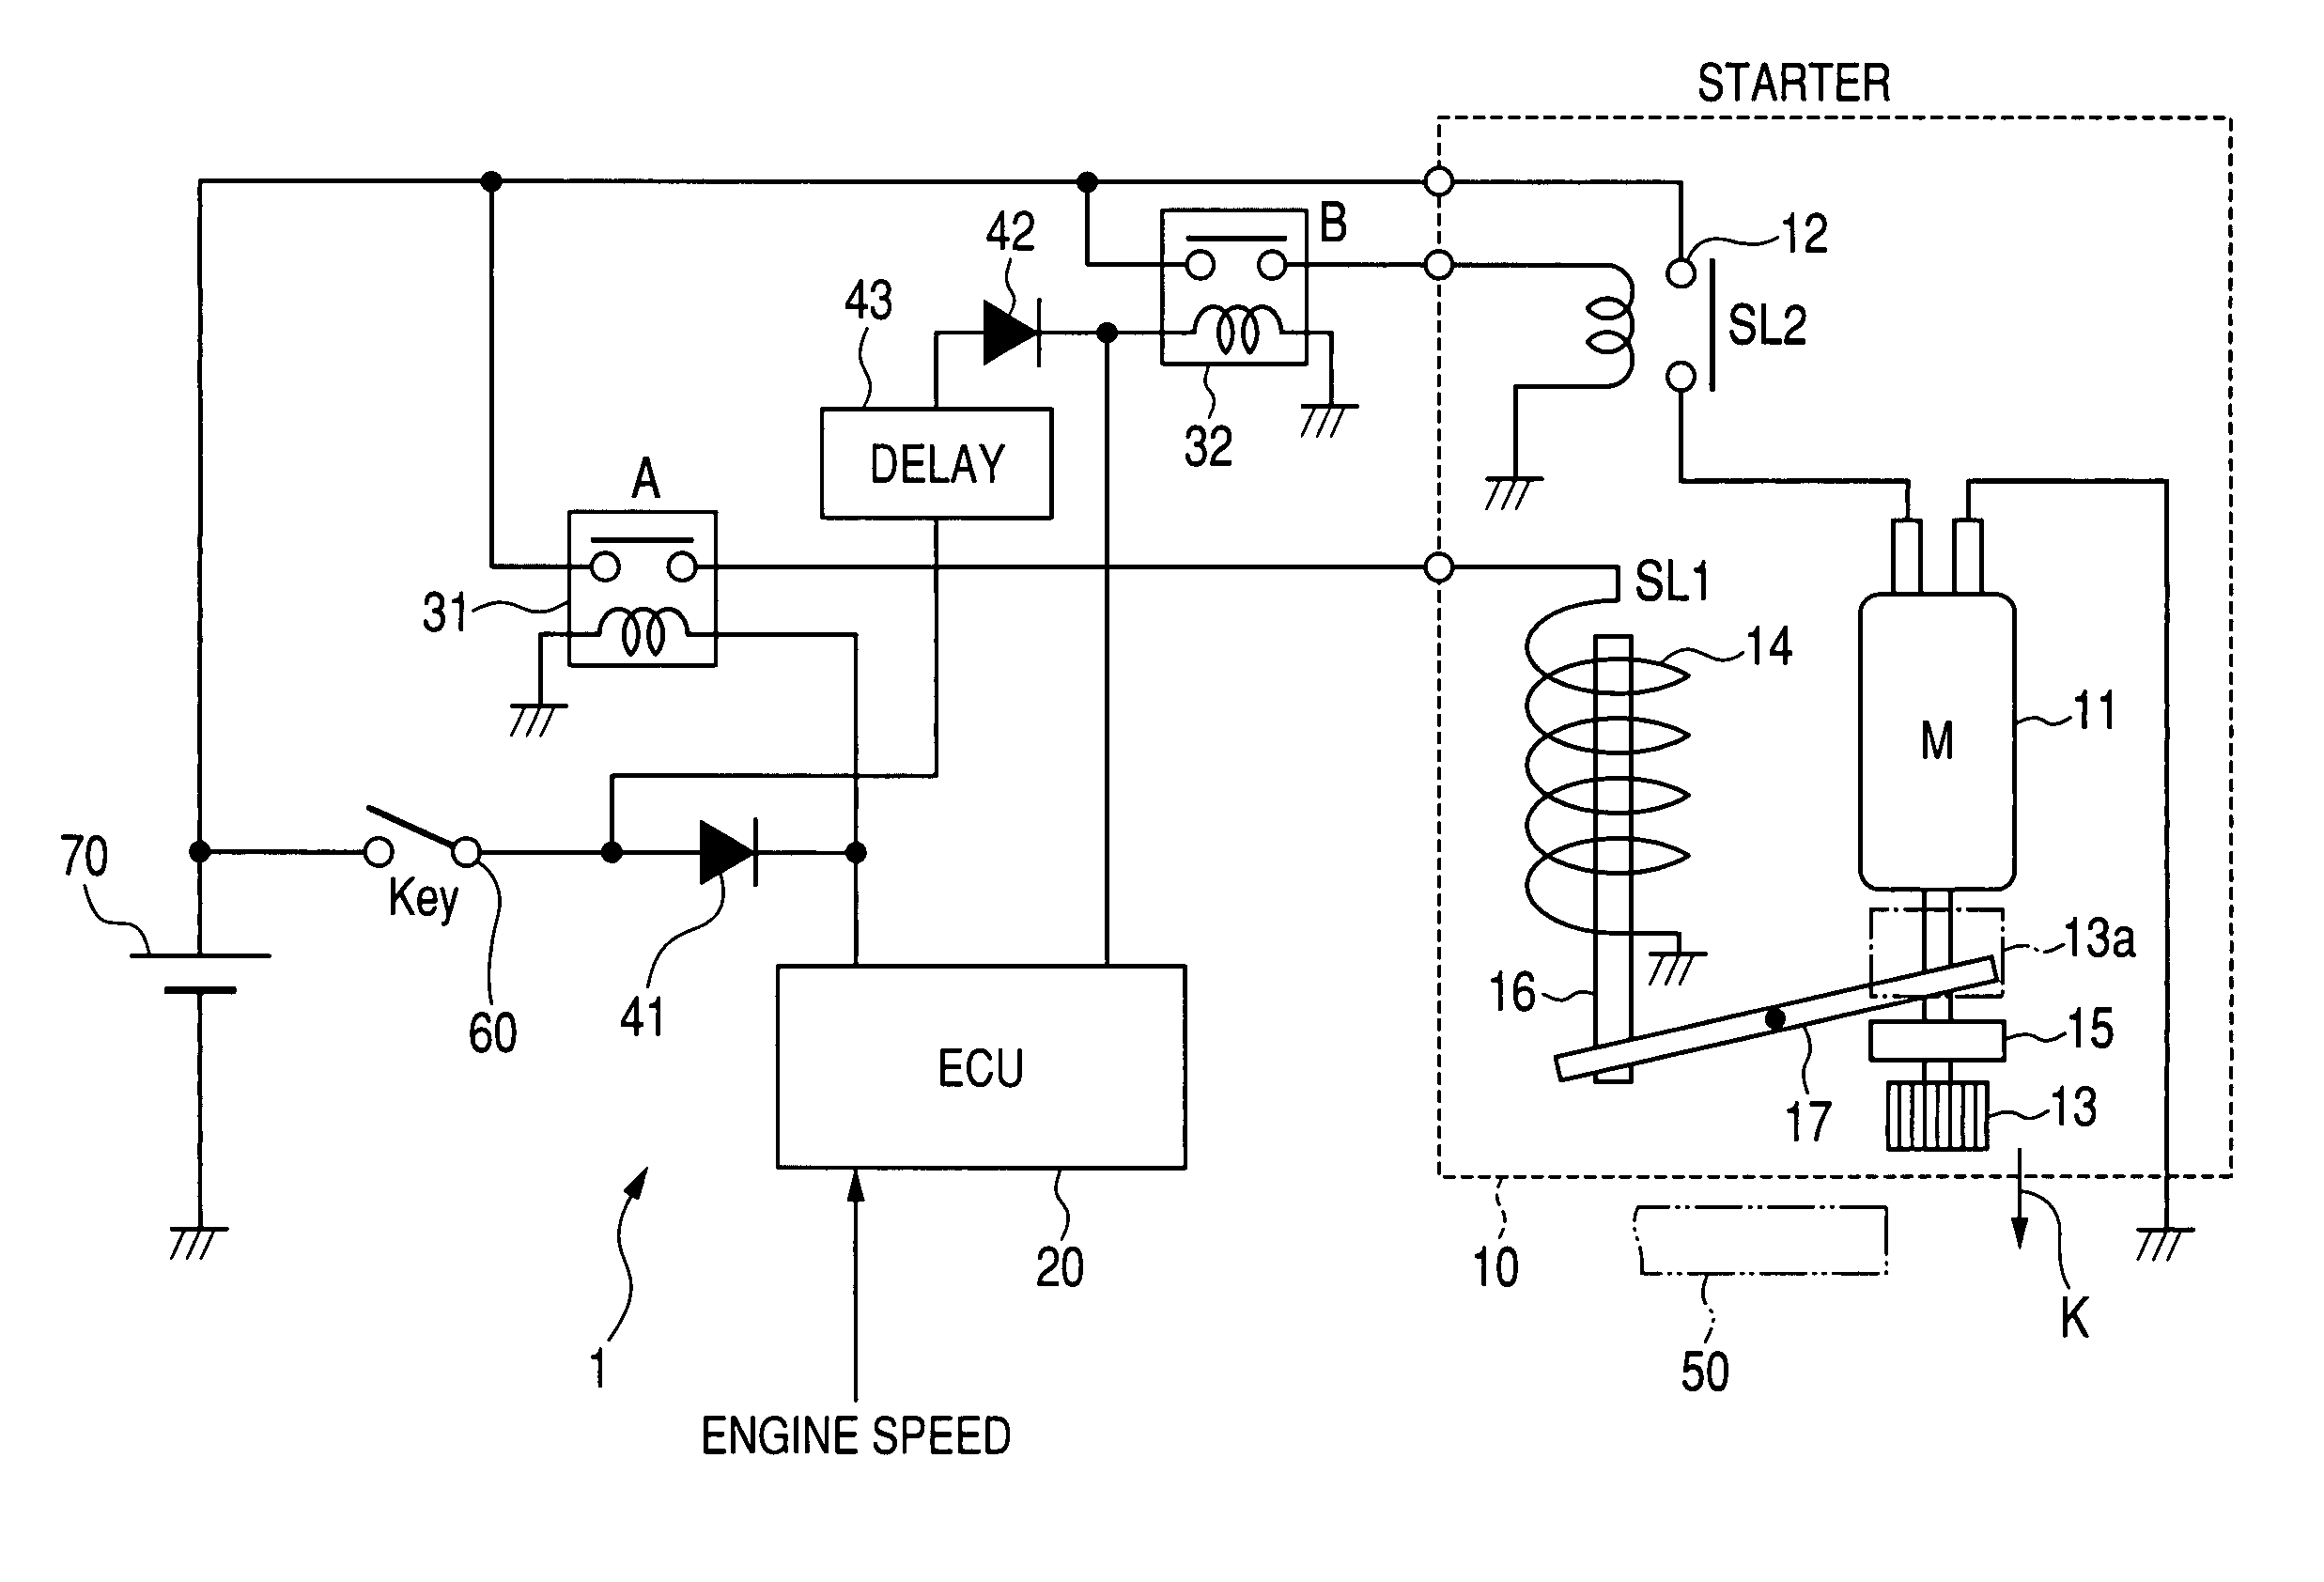 Engine start system for use in idle stop system for automotive vehicle